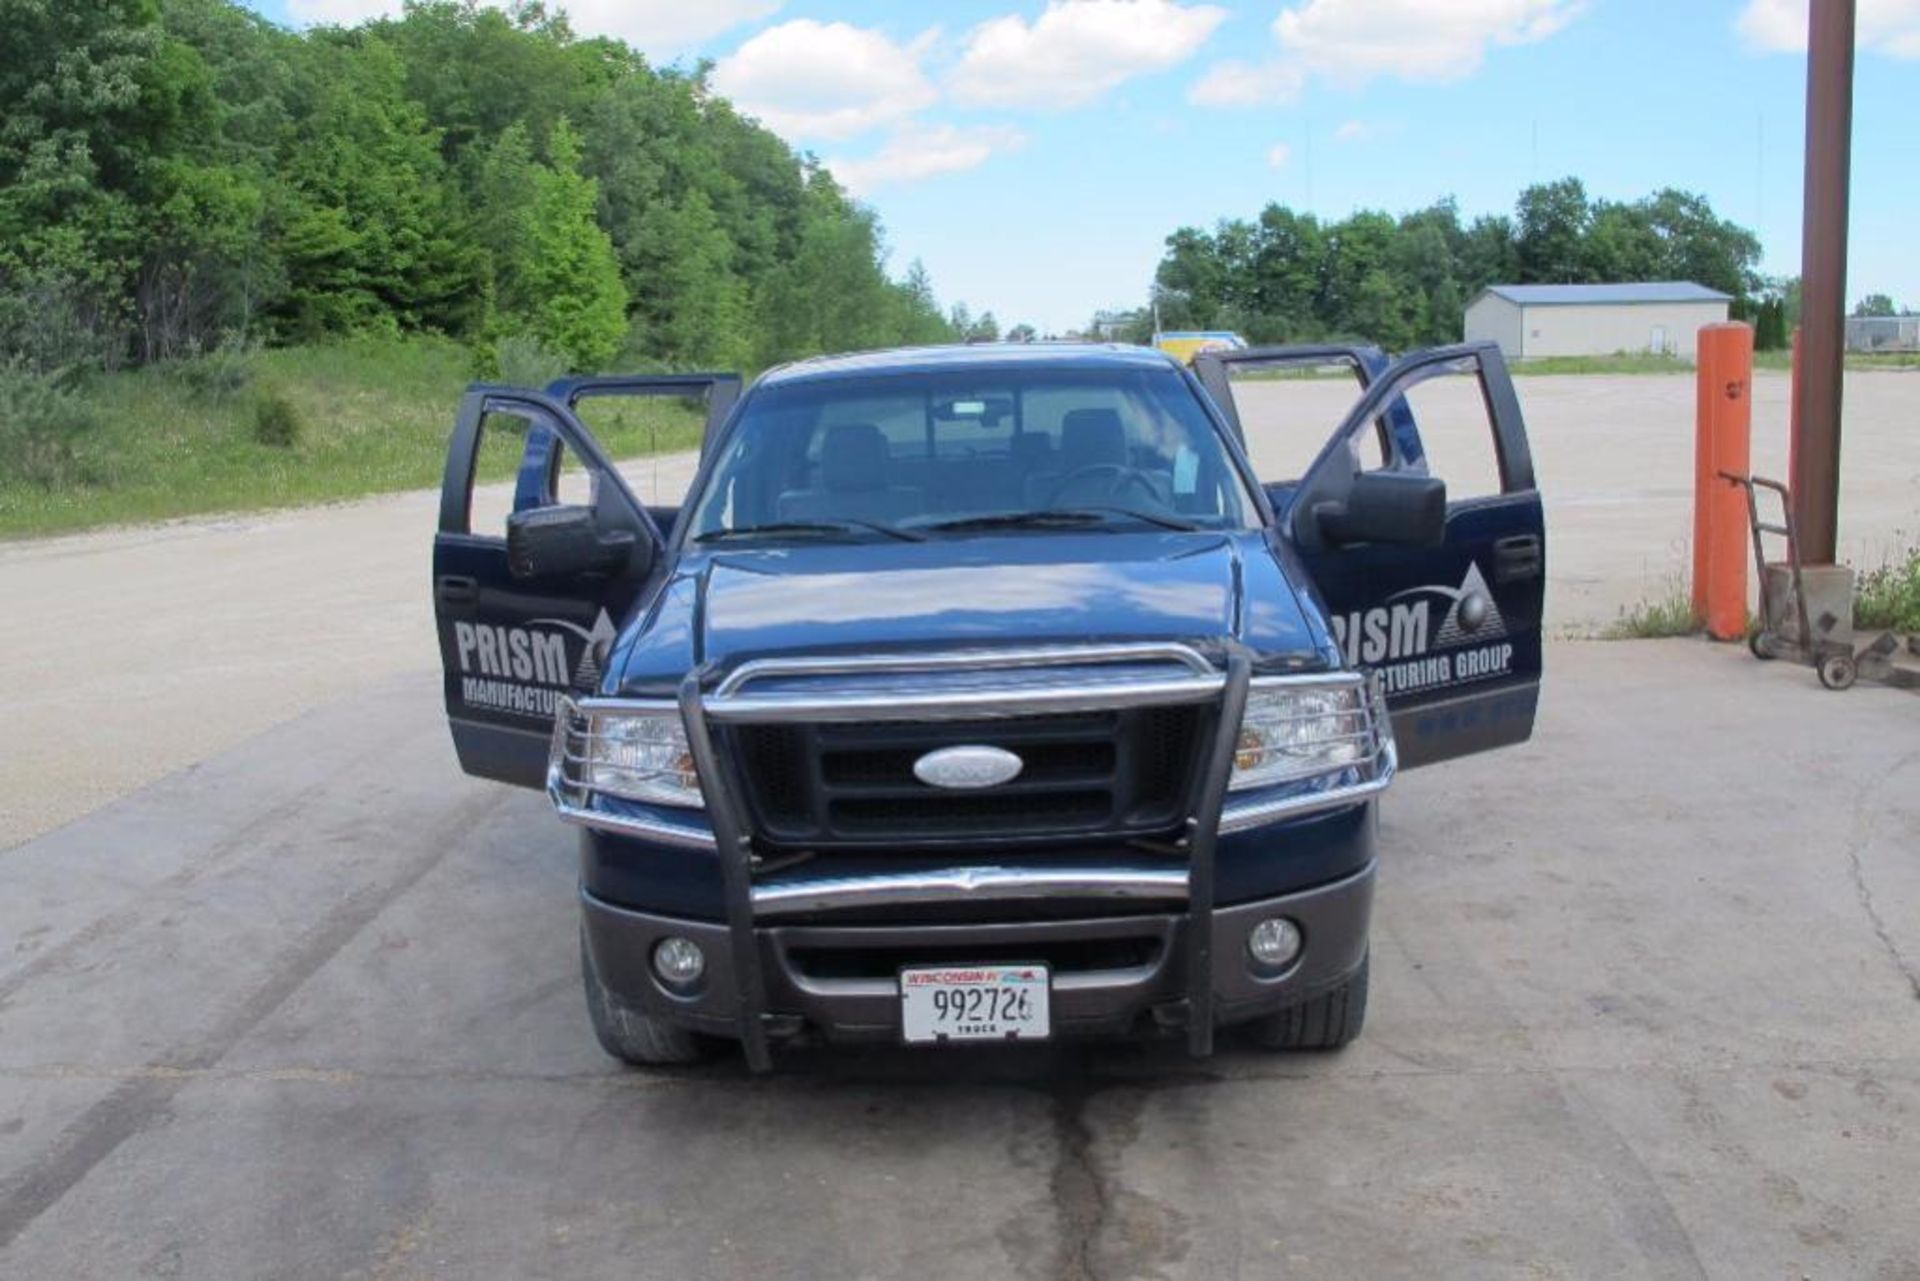 (2007) Ford 4 x 4 Crew Cab Pickup Truck, 5.4 Triton, FX4 Off-road, Short Box with Soft Cover, Brush - Image 8 of 8